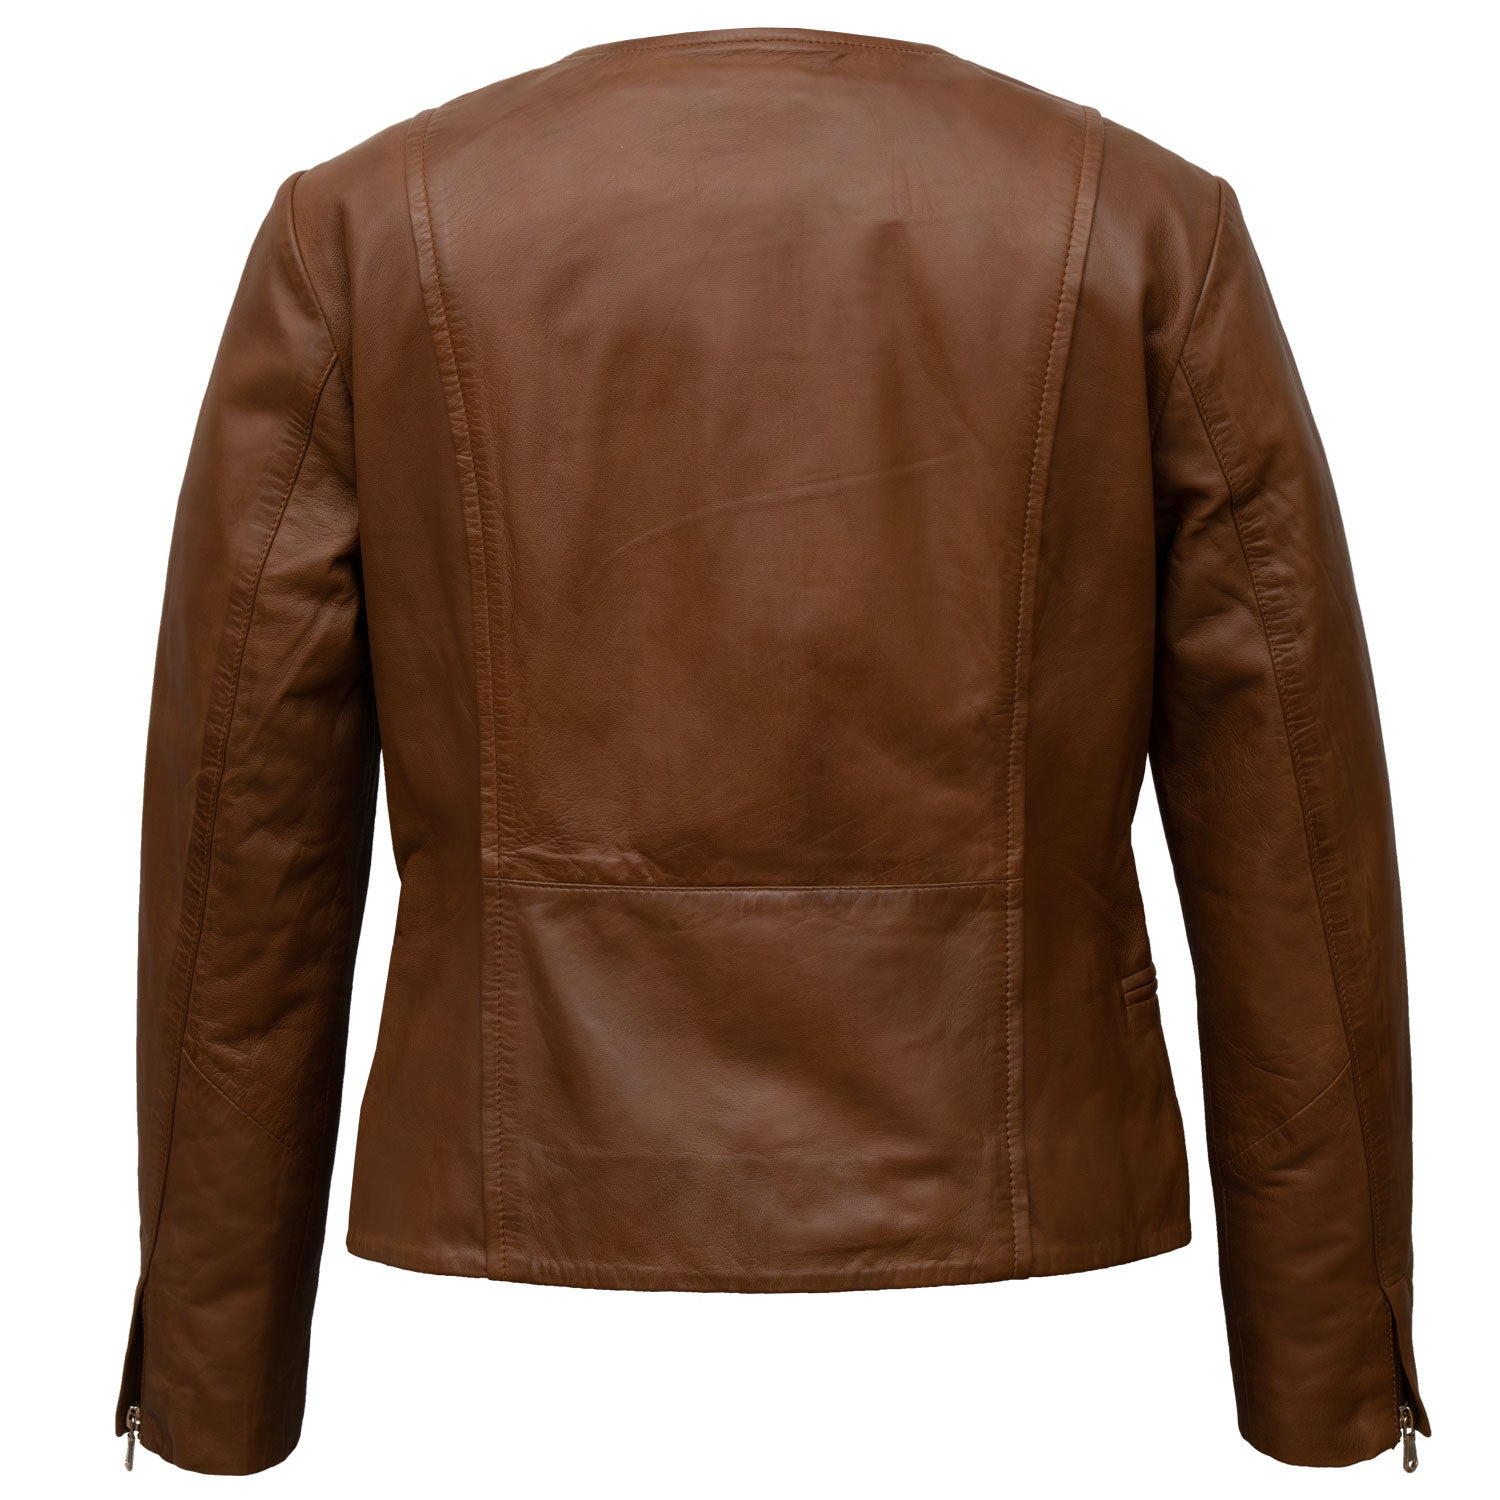 CollarLess Leather Jackets